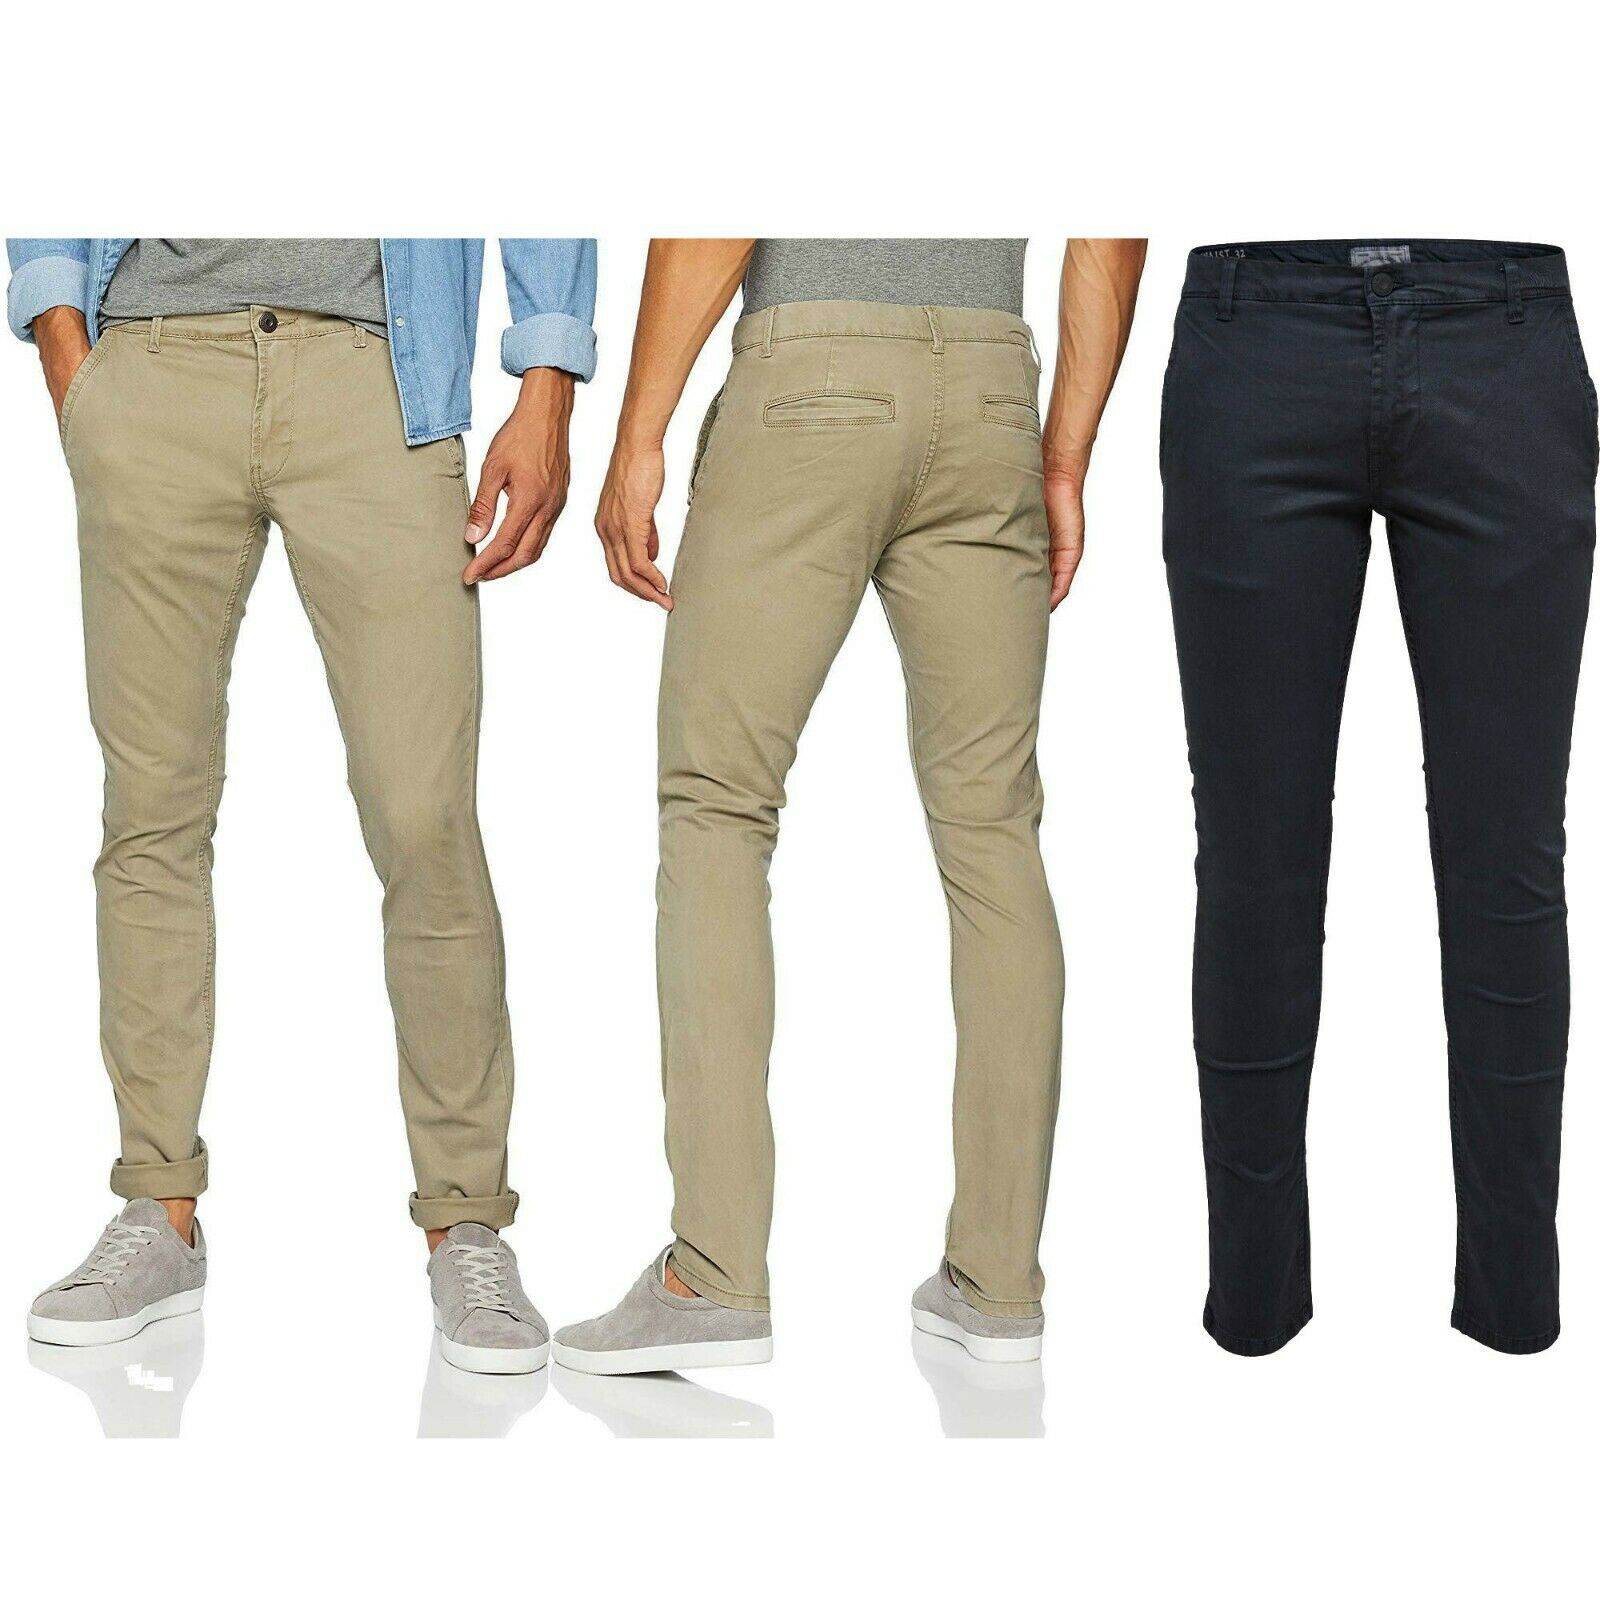 Only & Sons Mens Chino Trousers Regular Fit Cotton Stretch Jeans Casual ...